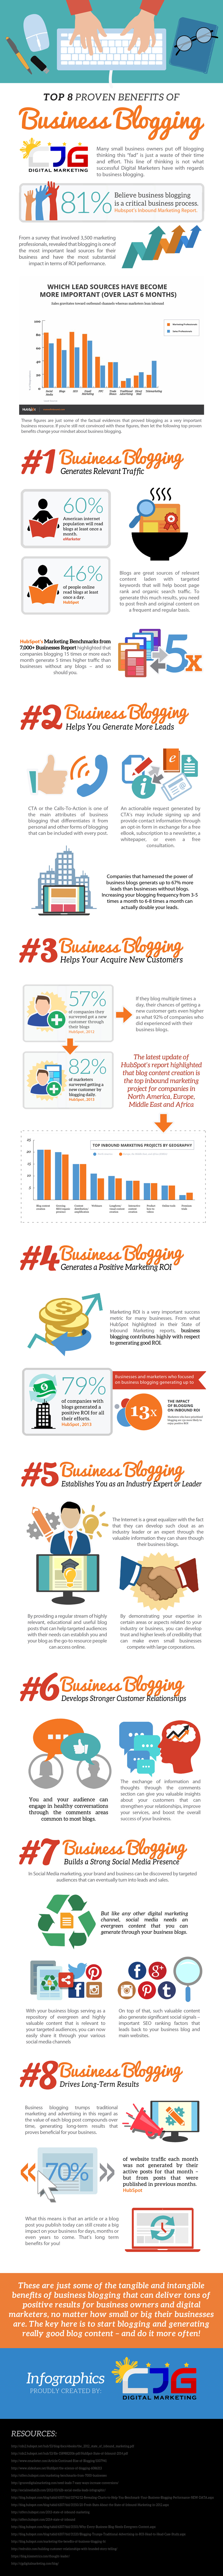 Top-8-Proven-Benefits-of-Business-Blogging